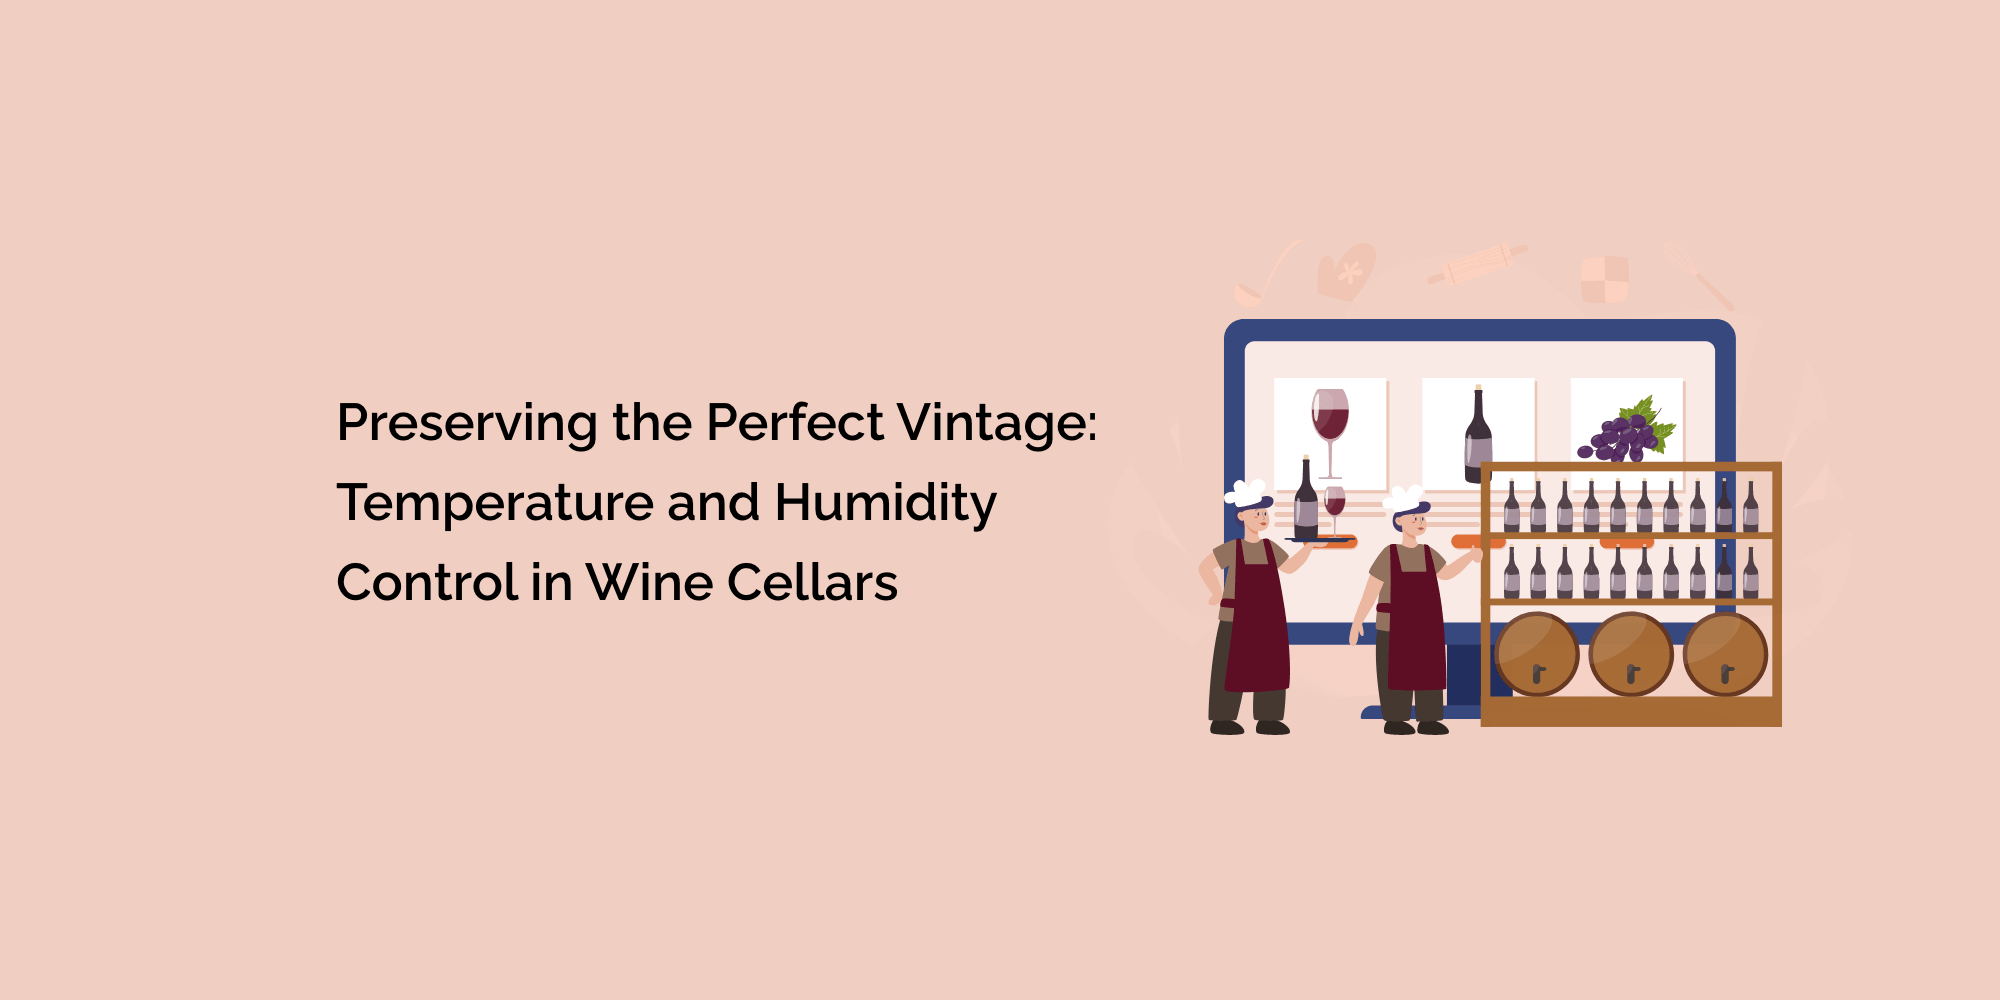 Preserving the Perfect Vintage: Temperature and Humidity Control in Wine Cellars